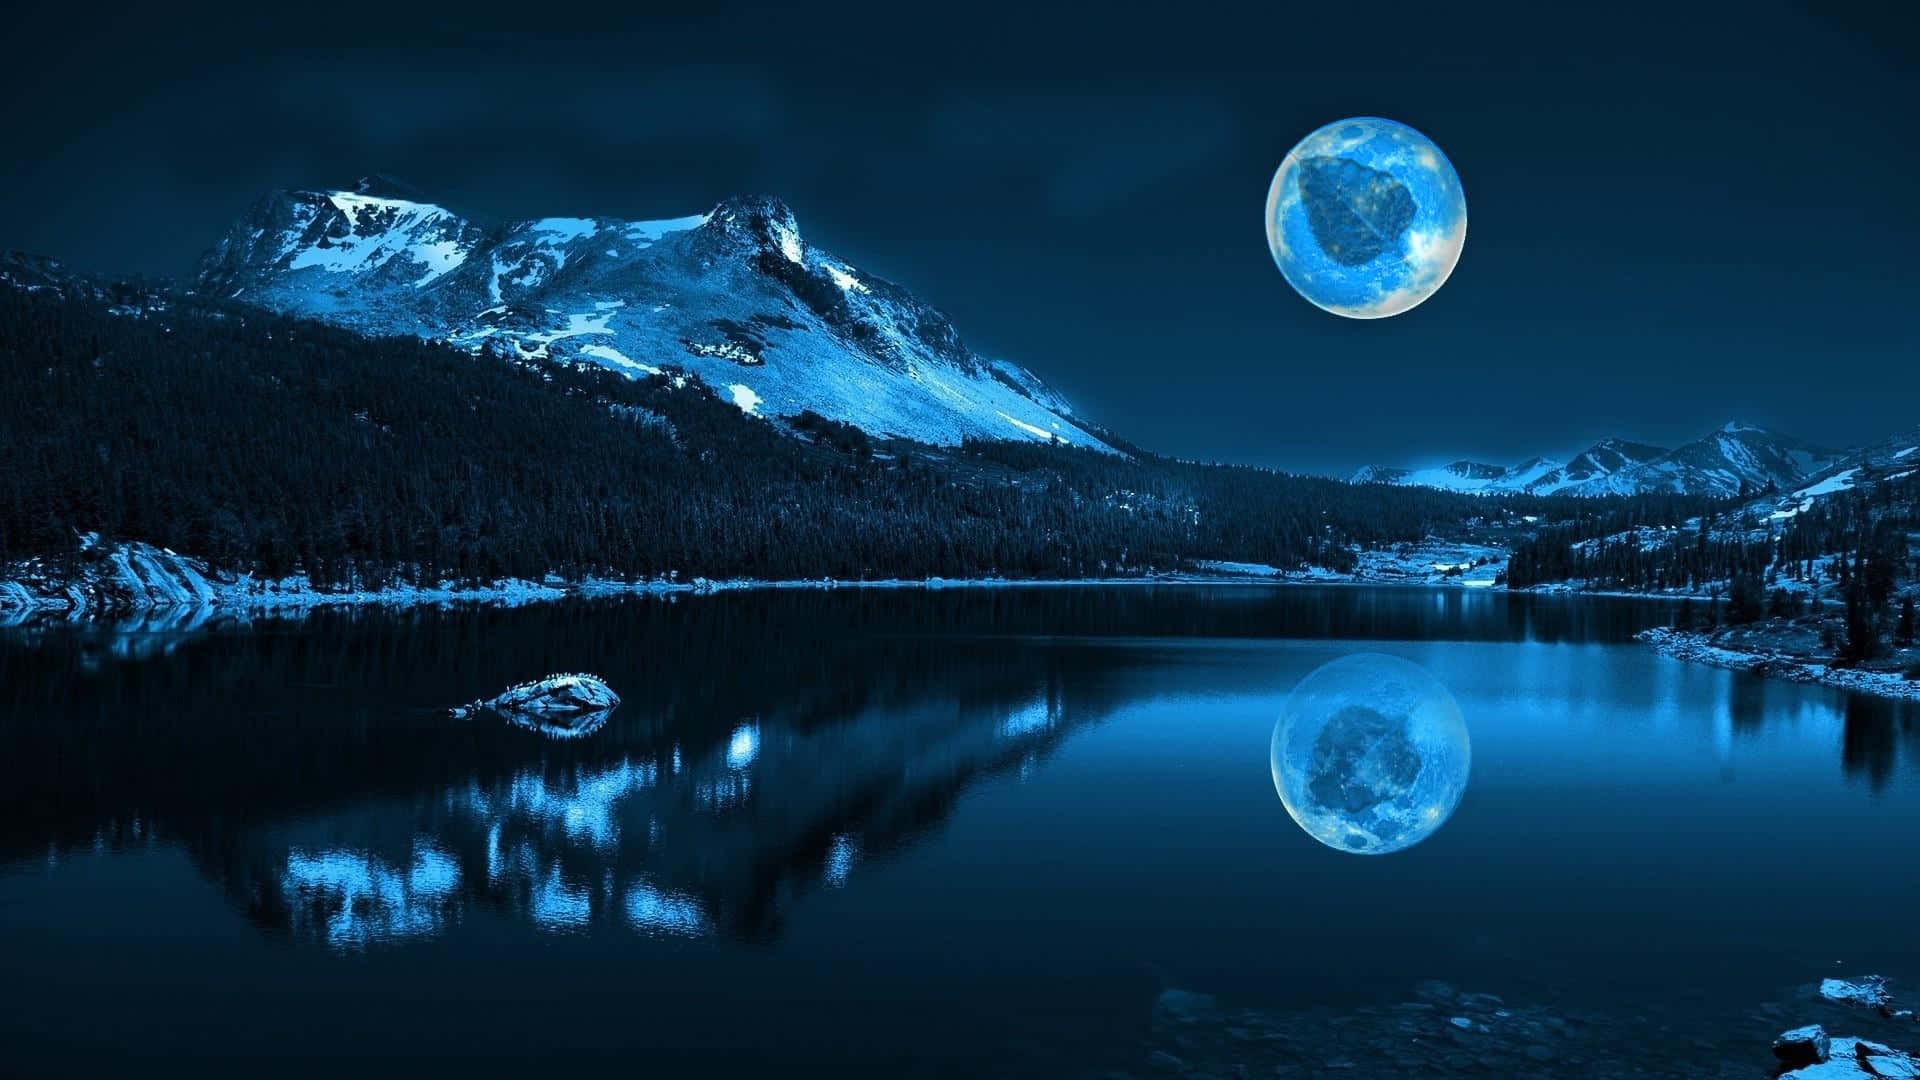 Enjoy the beauty of the night with a stunning view of the full Pretty Moon